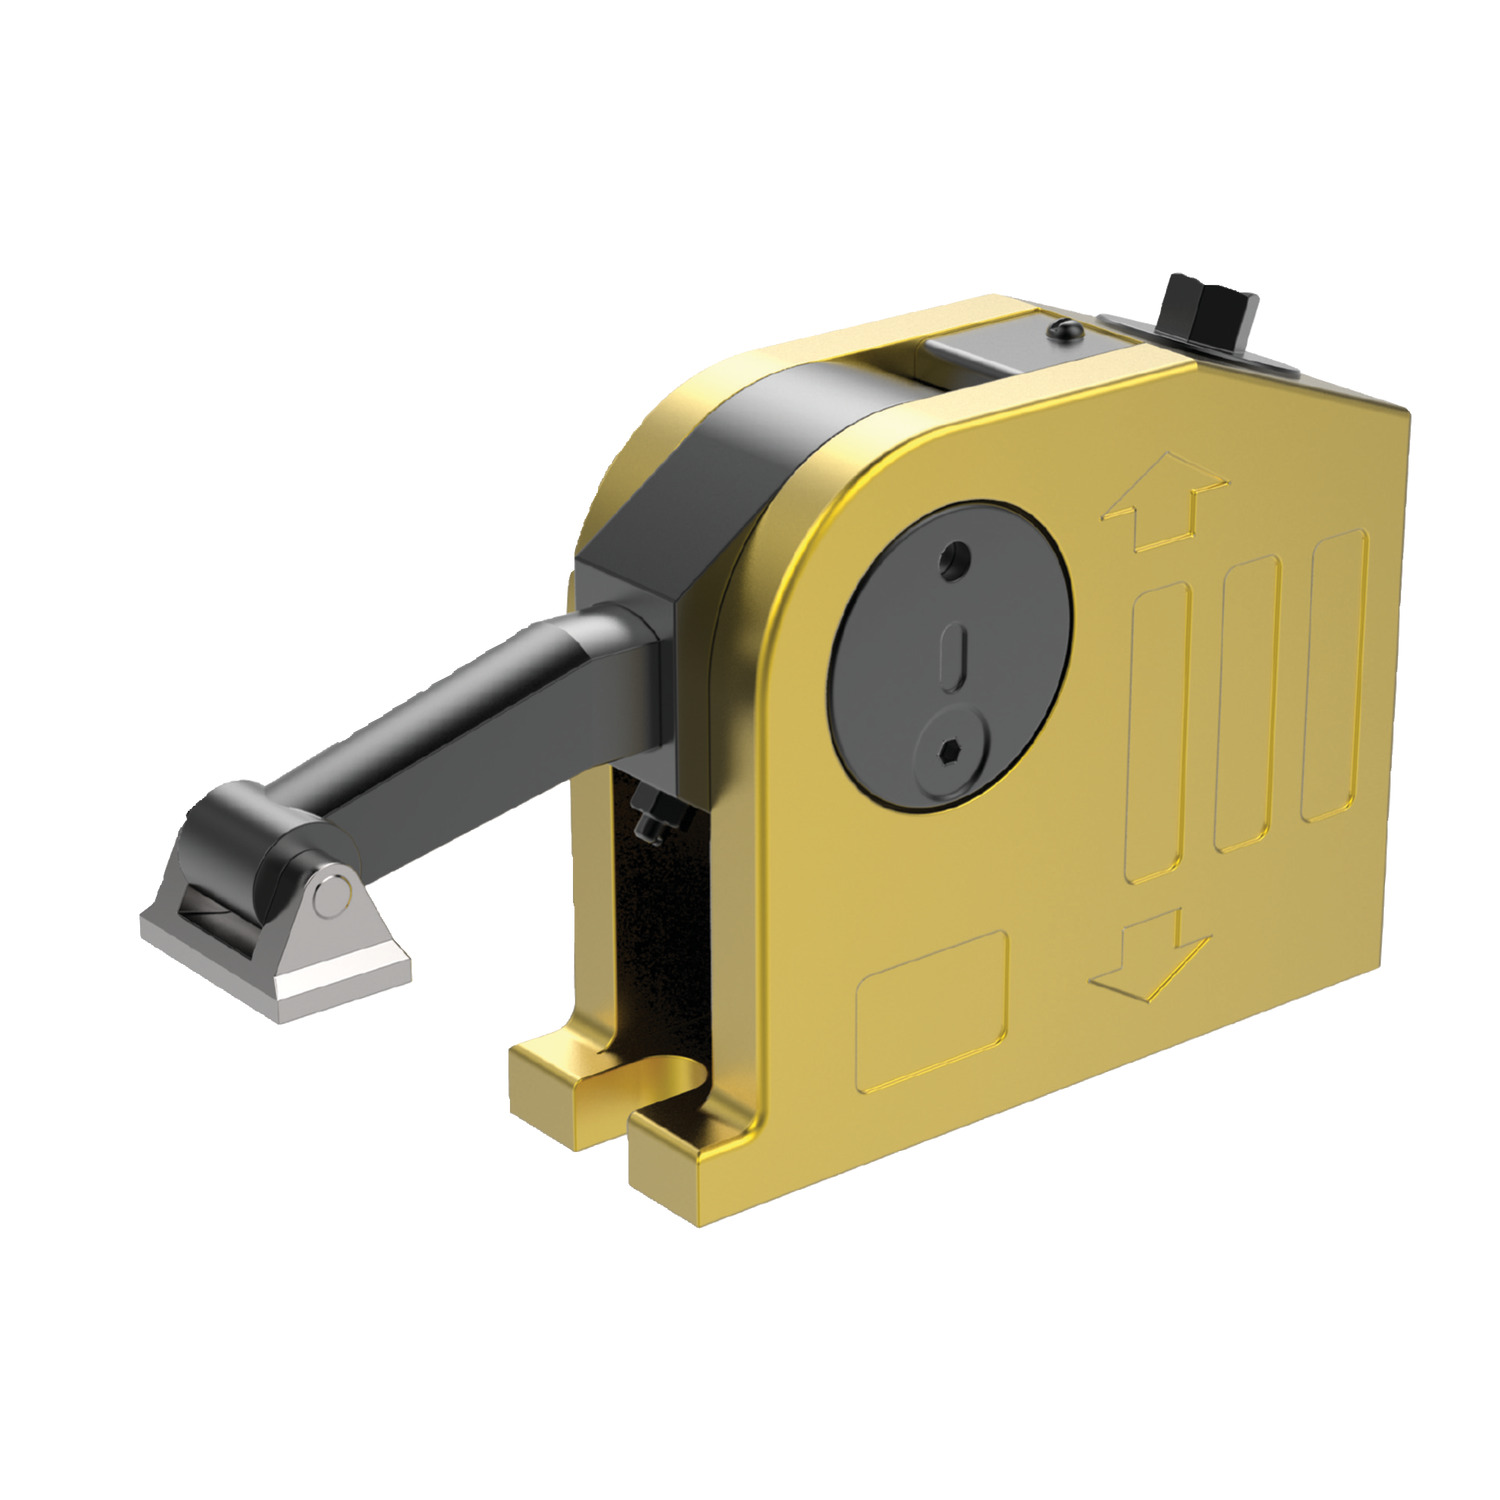 Duo Retractable Arm Clamps The Kopal Duo Clamp has two types of arm that allows lifting and clamping capability to be achieved.